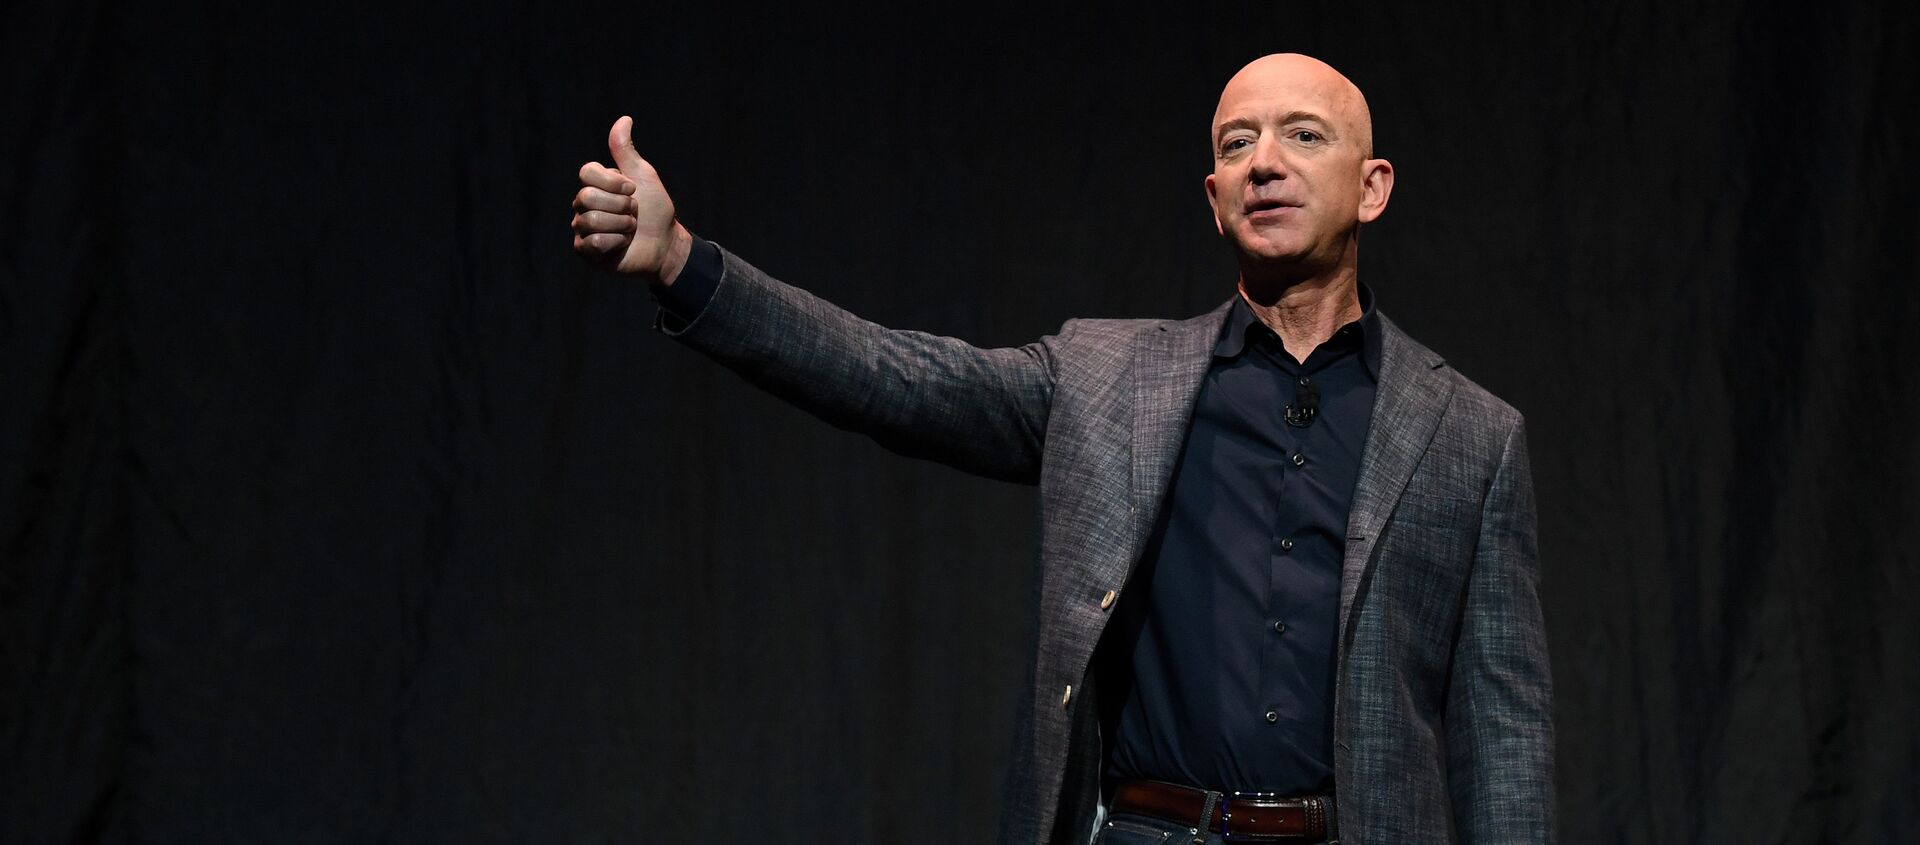 Founder, Chairman, CEO and President of Amazon Jeff Bezos gives a thumbs up as he speaks during an event about Blue Origin's space exploration plans in Washington, U.S., May 9, 2019. - Sputnik International, 1920, 17.02.2021